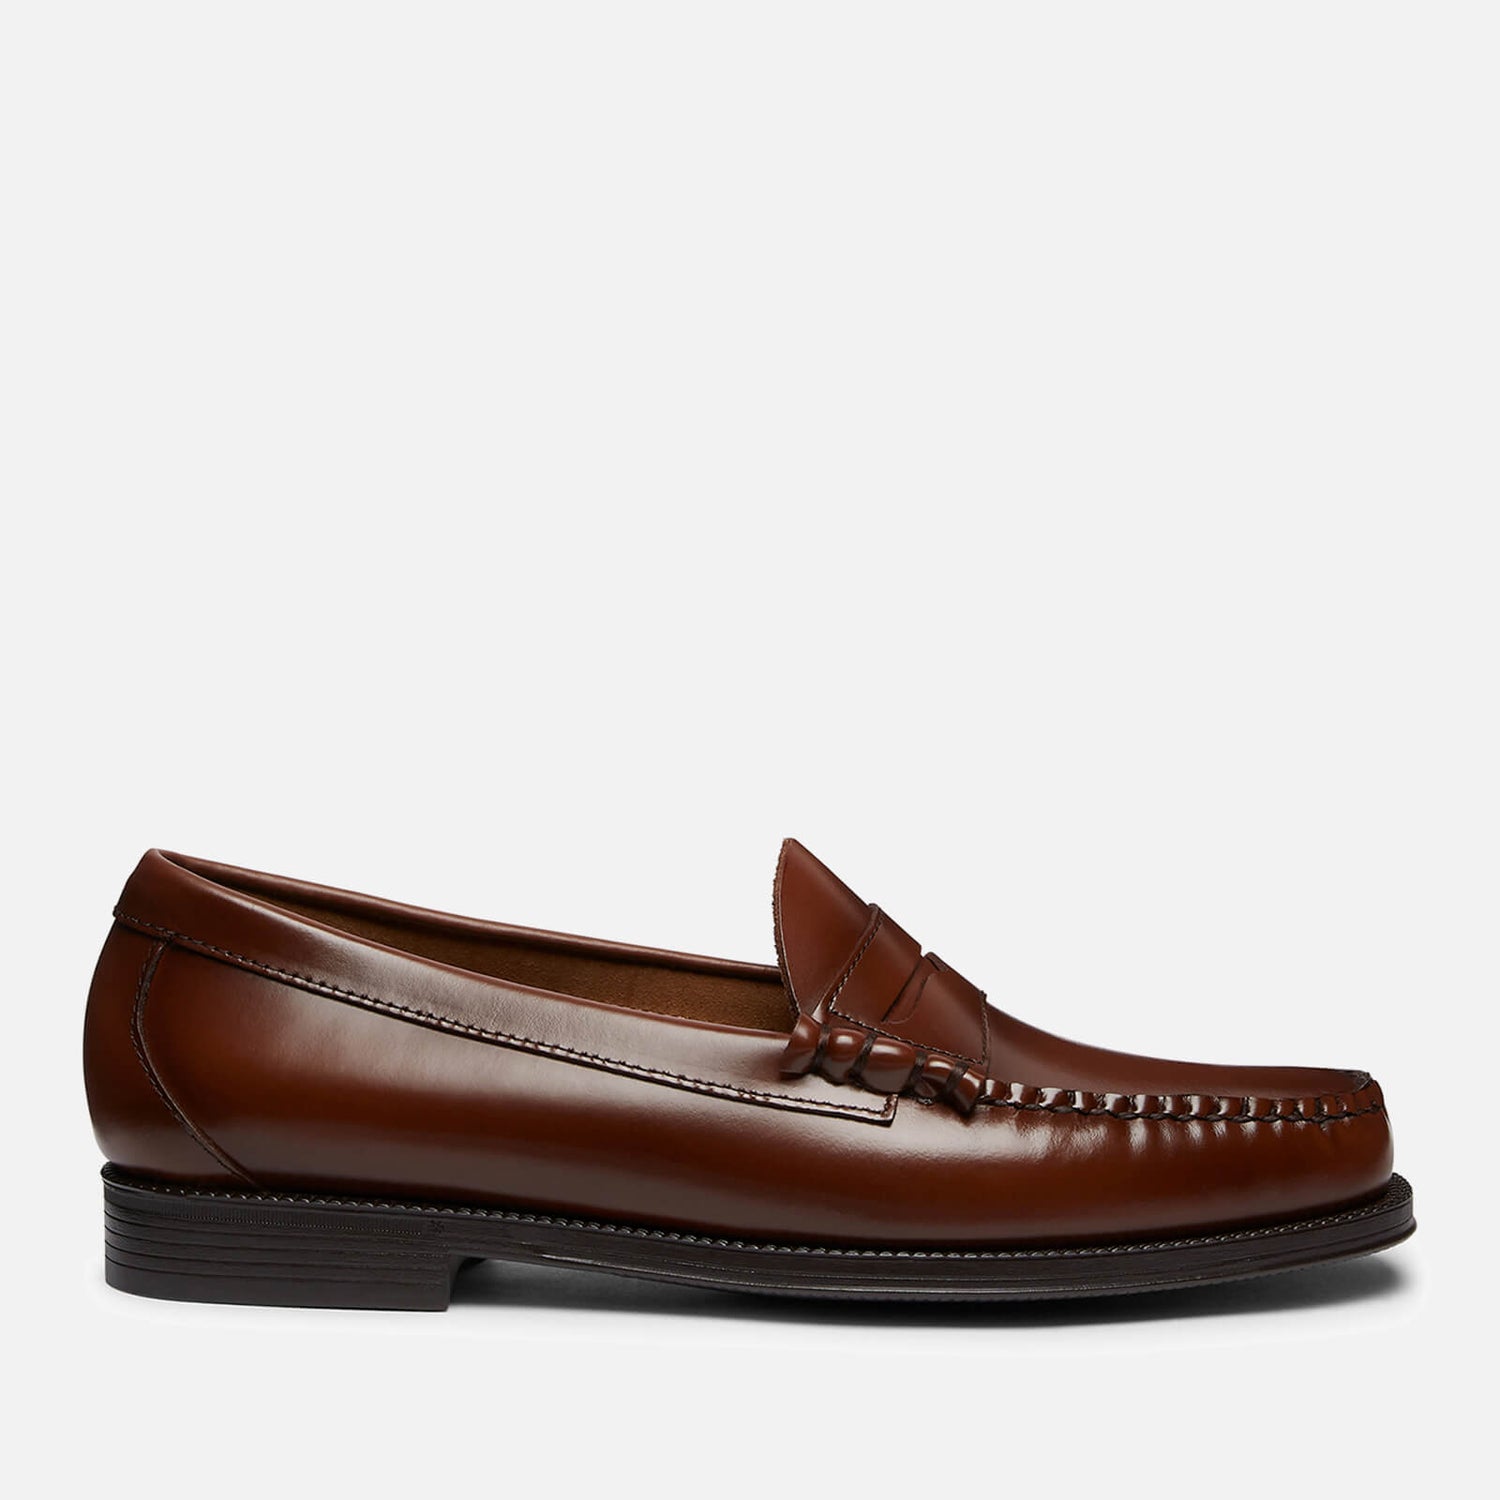 G.H Bass Men's Larson Moc Leather Penny Loafers - UK 8